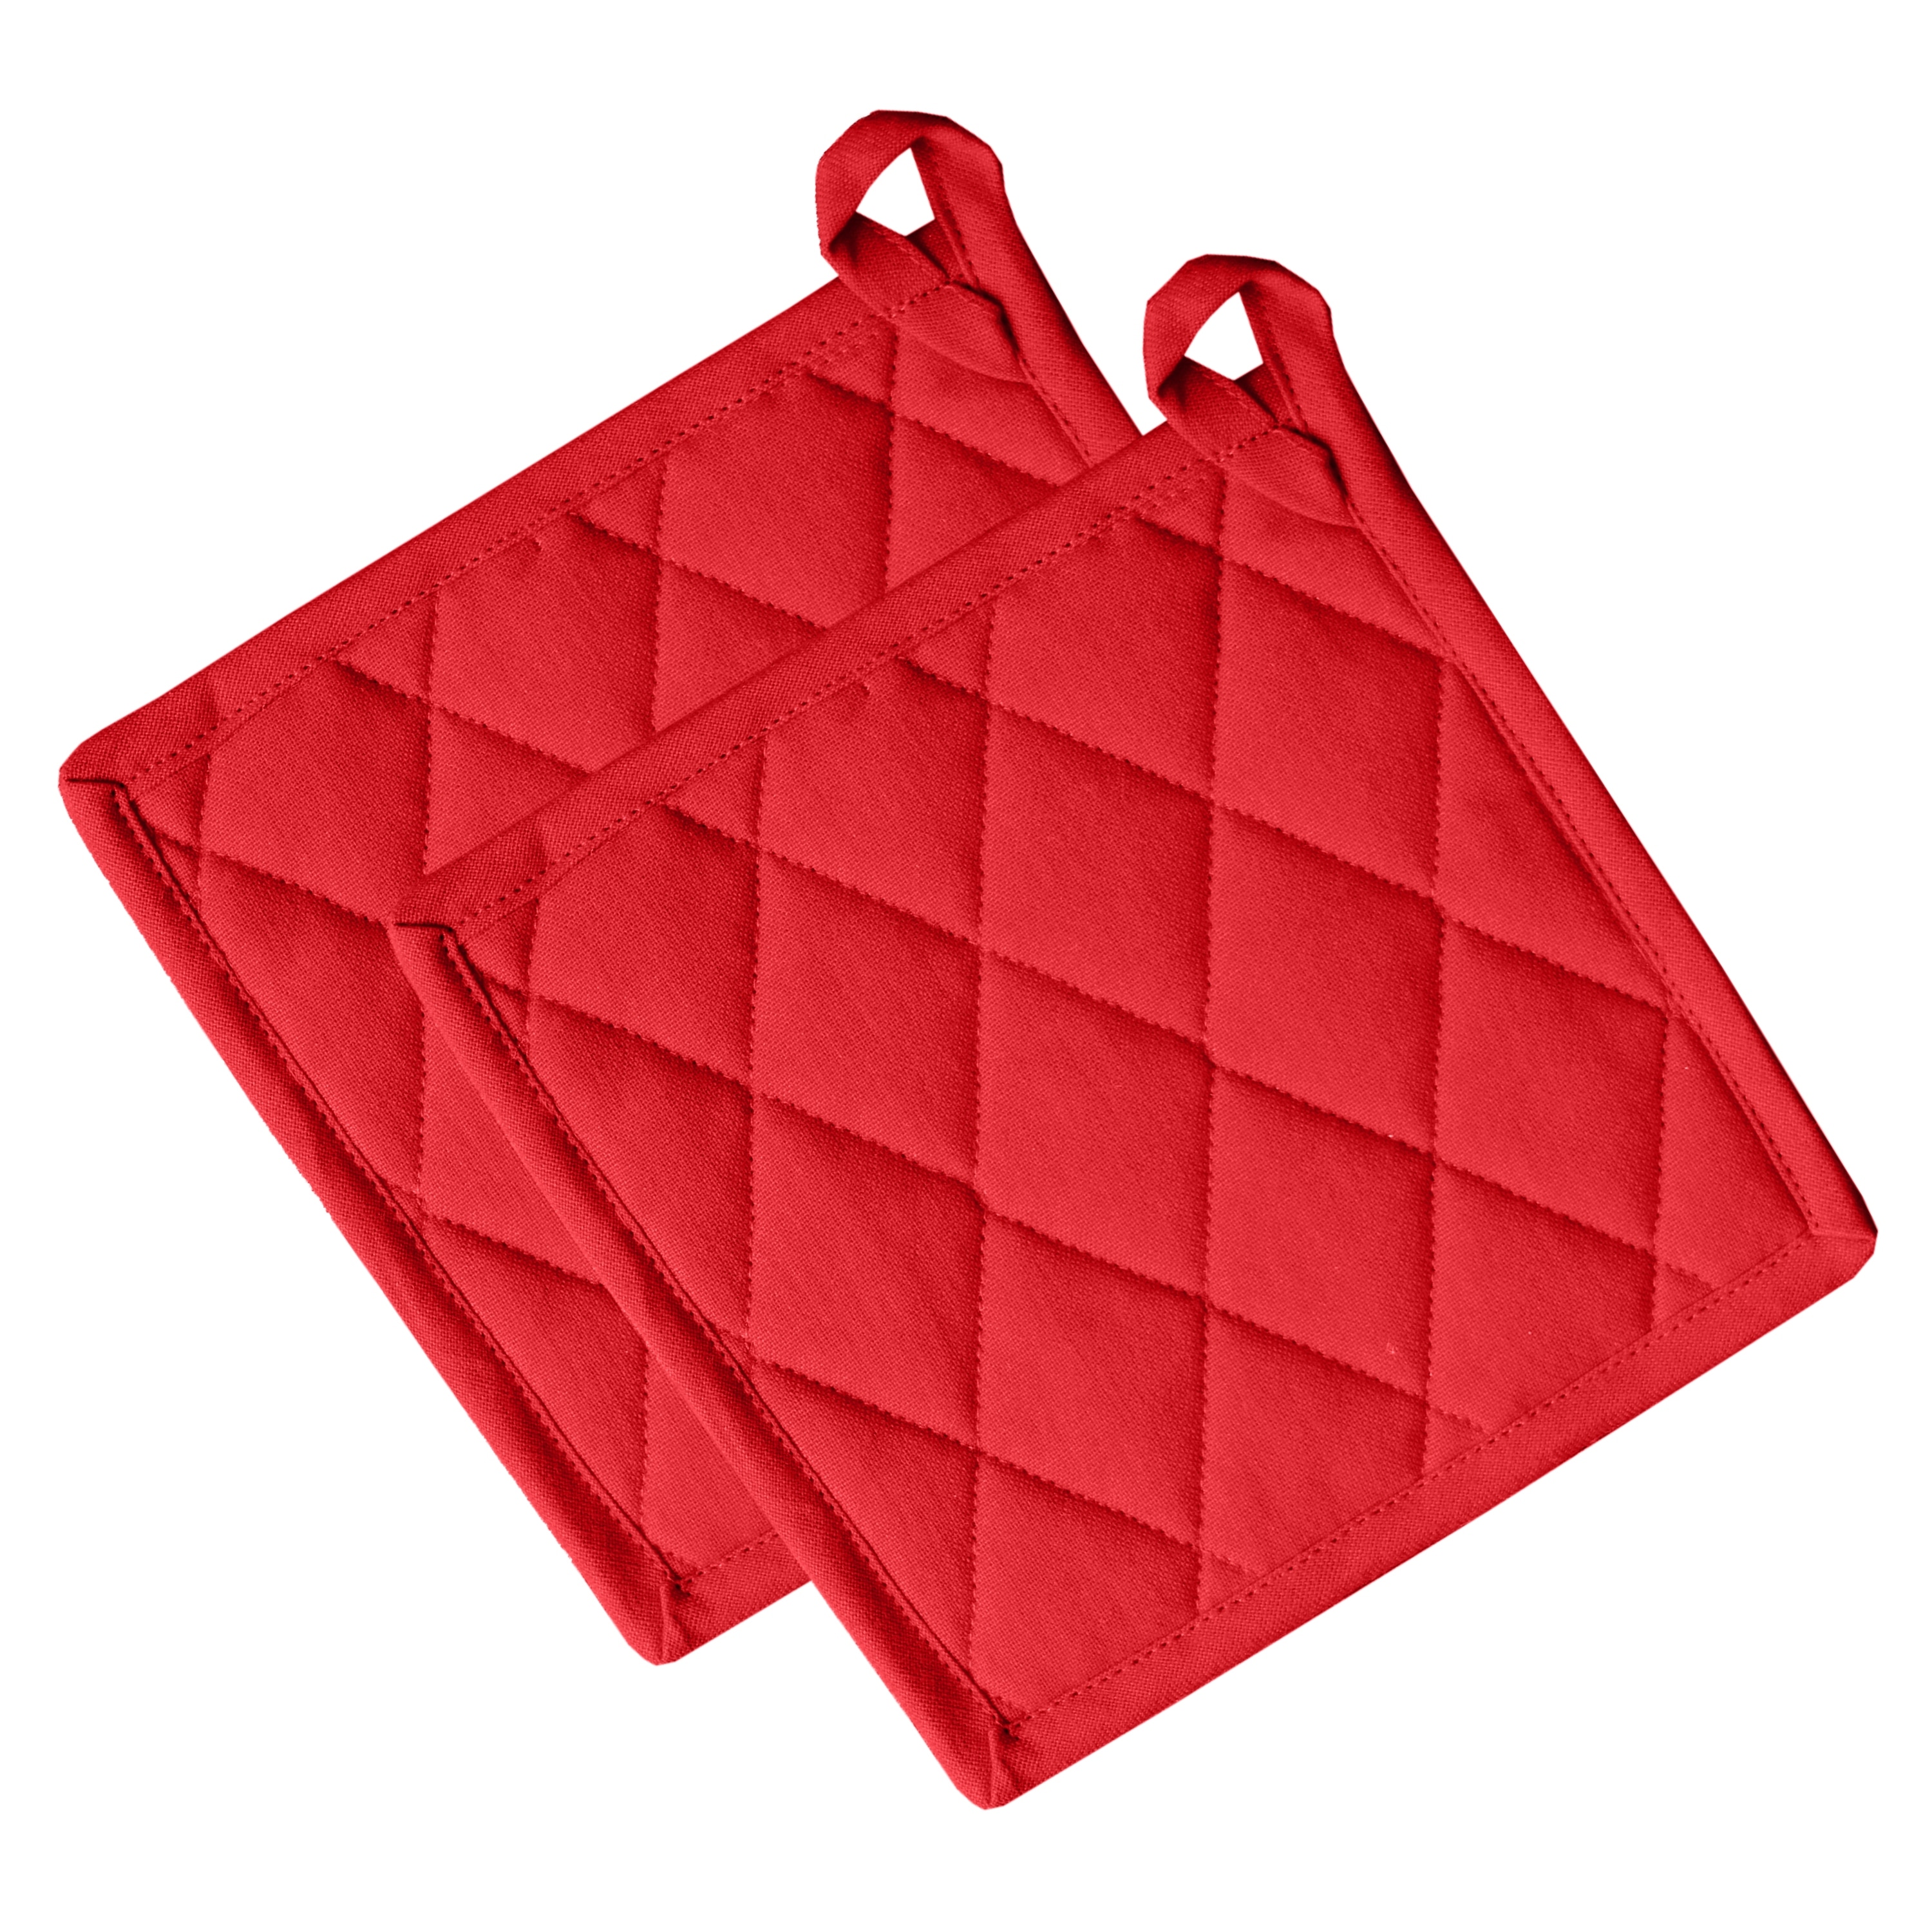 https://ak1.ostkcdn.com/images/products/is/images/direct/5a2335a0f3e2b46a4ef765036678d23894d01101/Fabstyles-Solo-Waffle-Cotton-Oven-Mitt-%26-Pot-Holder-Set-of-4.jpg